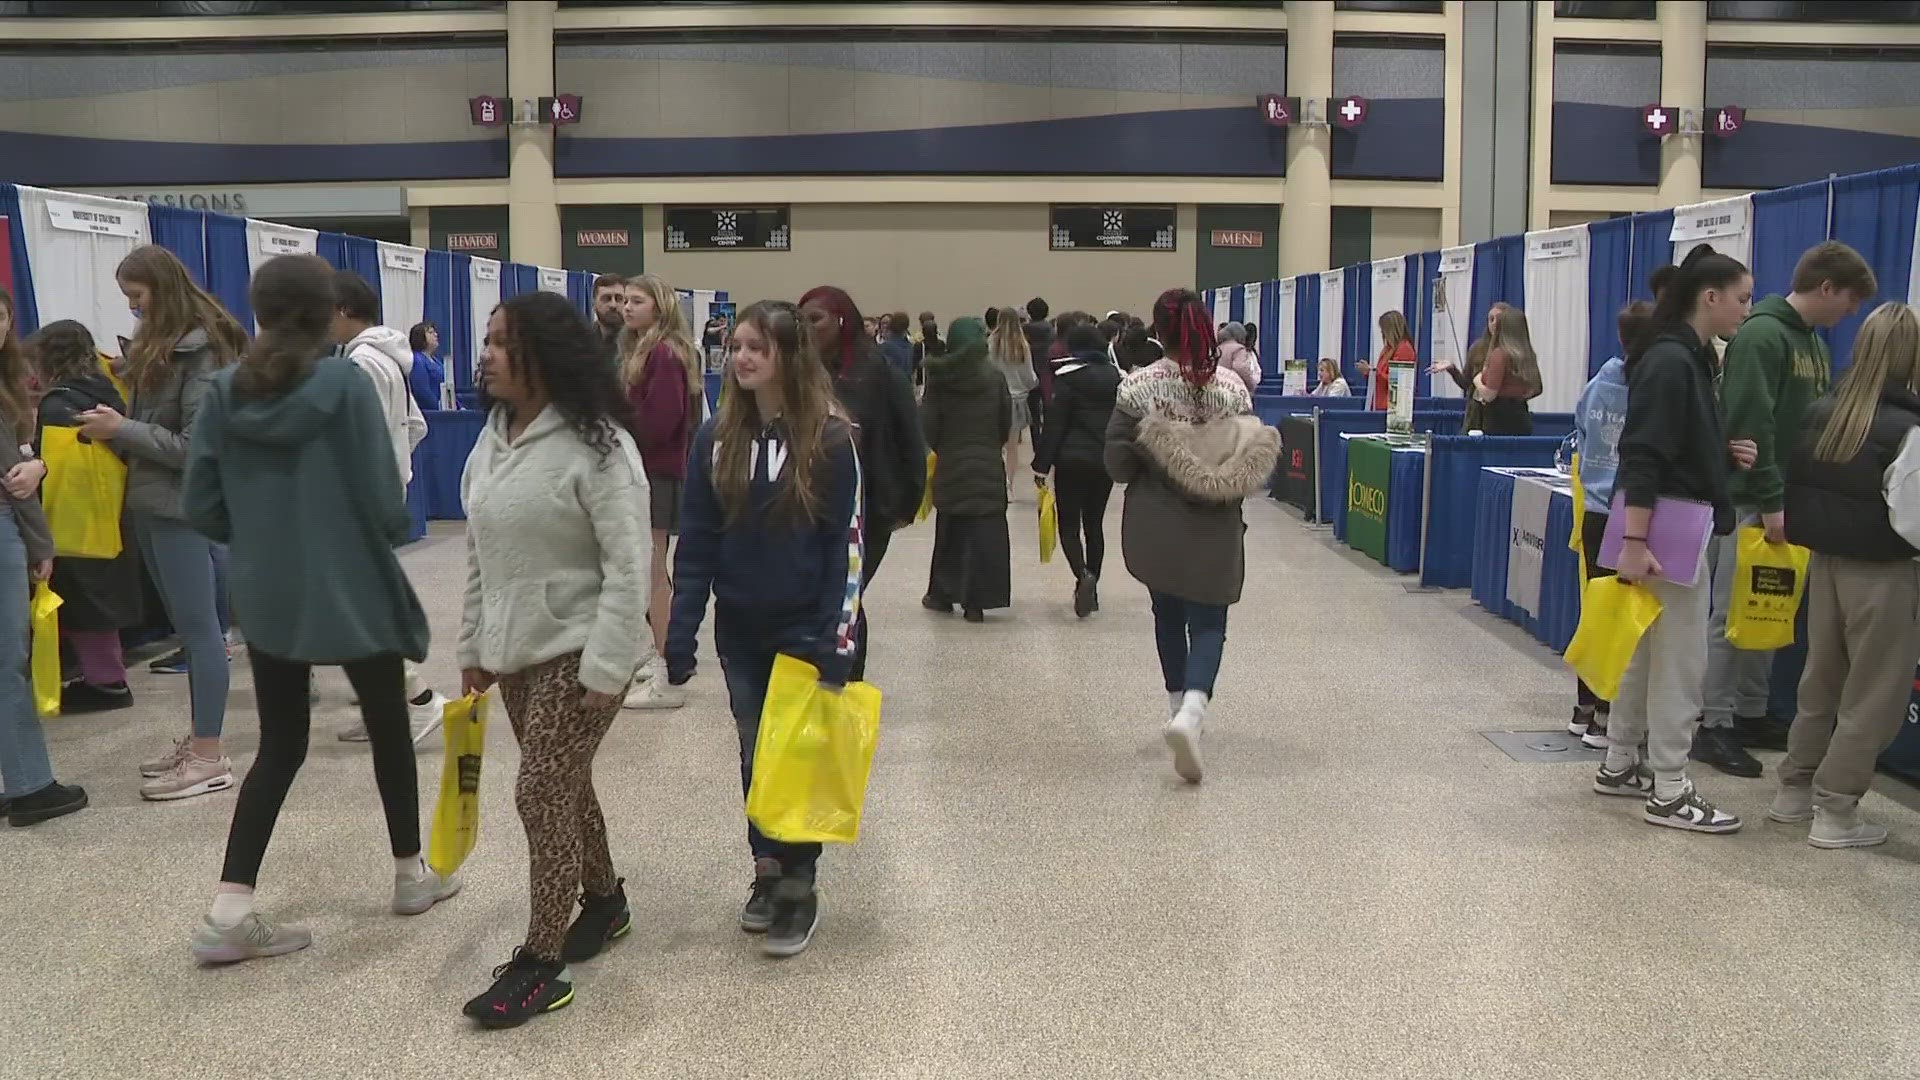 Buffalo National College Fair has returned to convention center in downtown Buffalo.